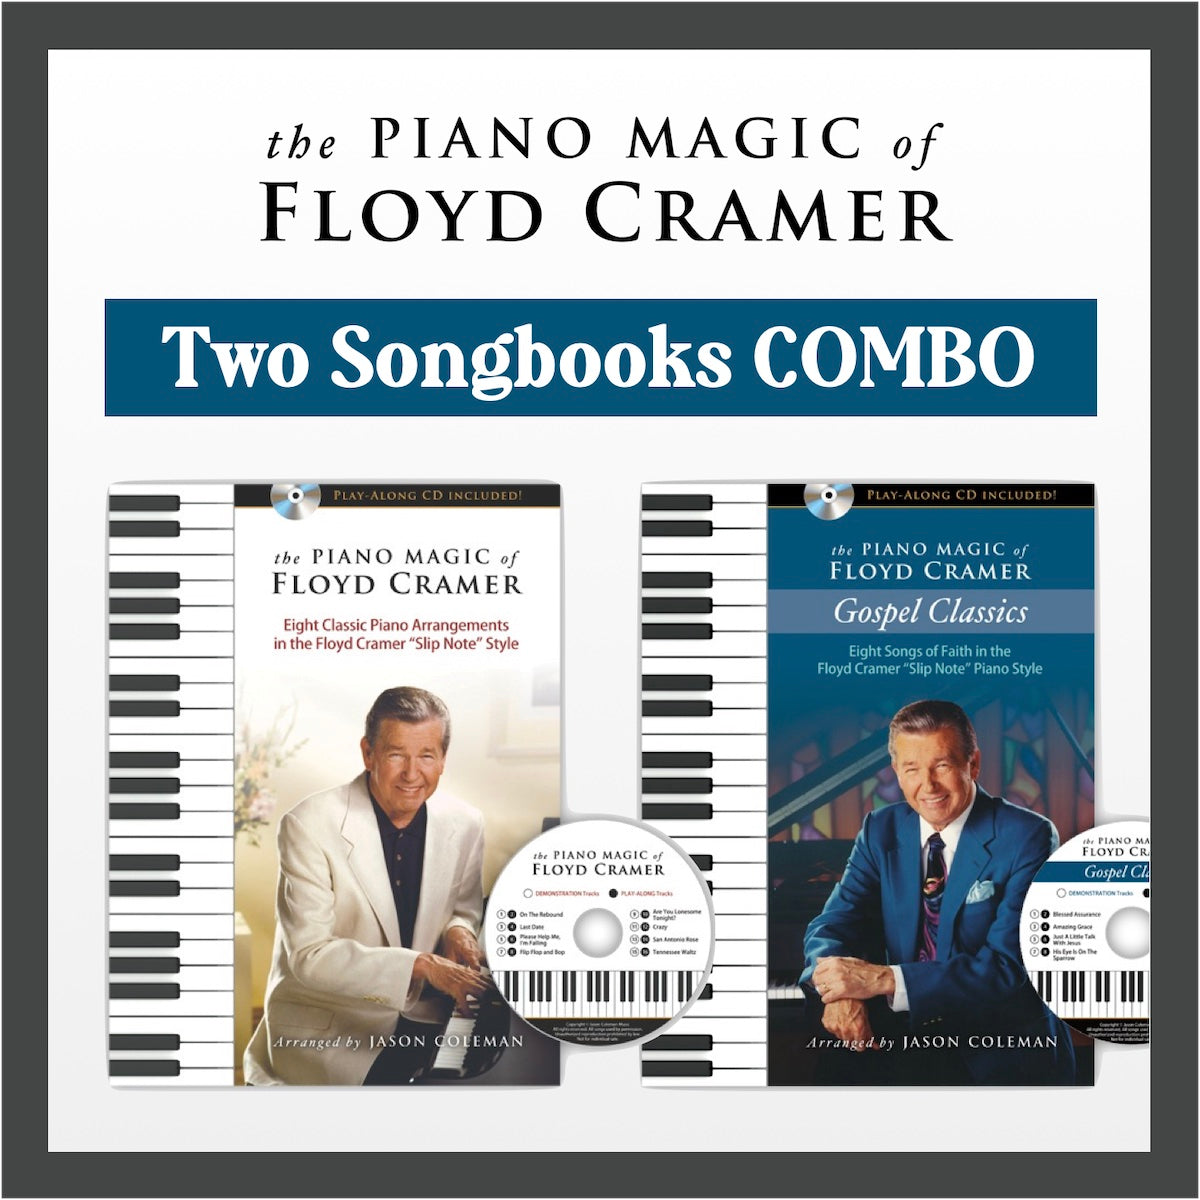 The Piano Magic of Floyd Cramer: Two Songbooks Combo (Save $10)